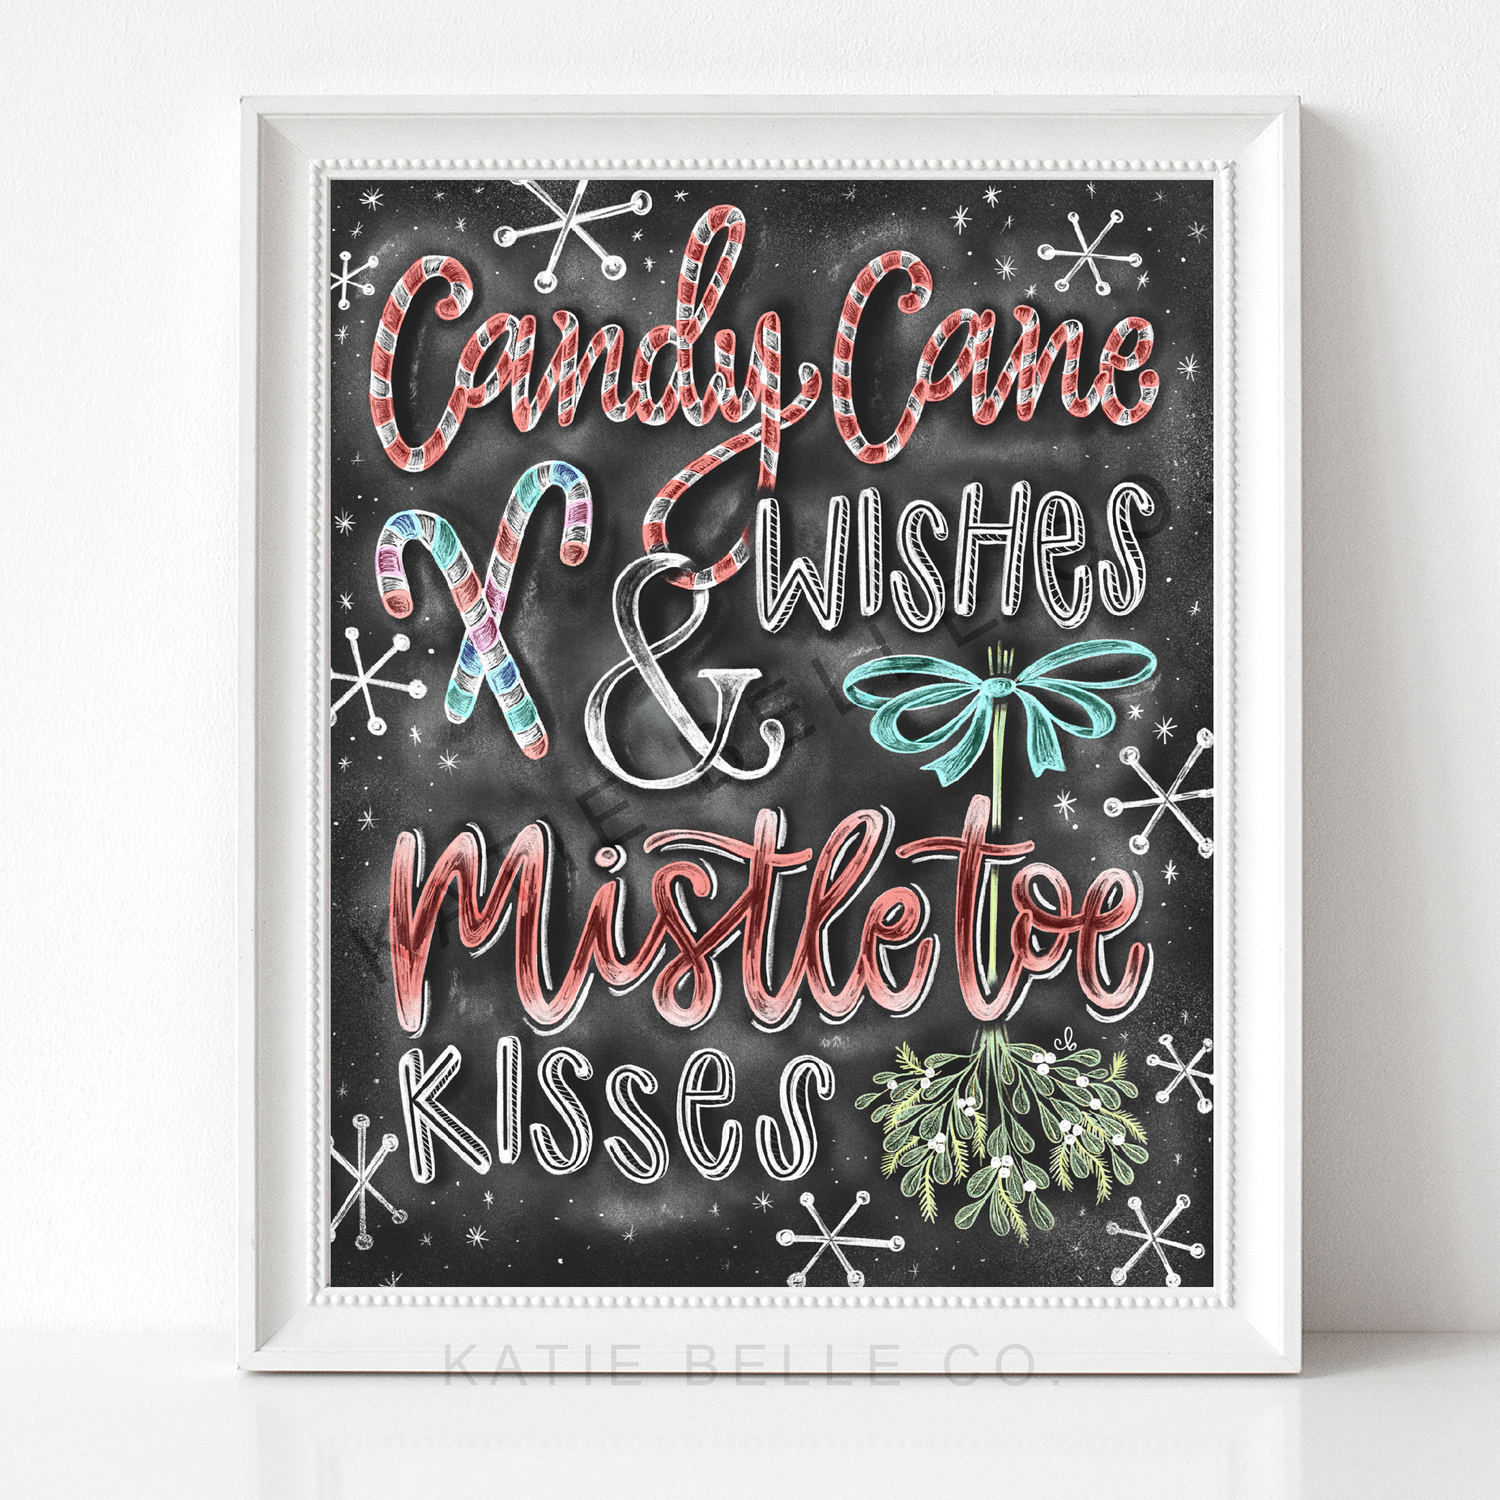 candy cane wishes and mistletoe kisses. mistletoe are. christmas art. christmas decor. christmas gathering. chalkboard print. chalk art. snowflake details. Candy cane font. Hand drawn illustration. katie belle co